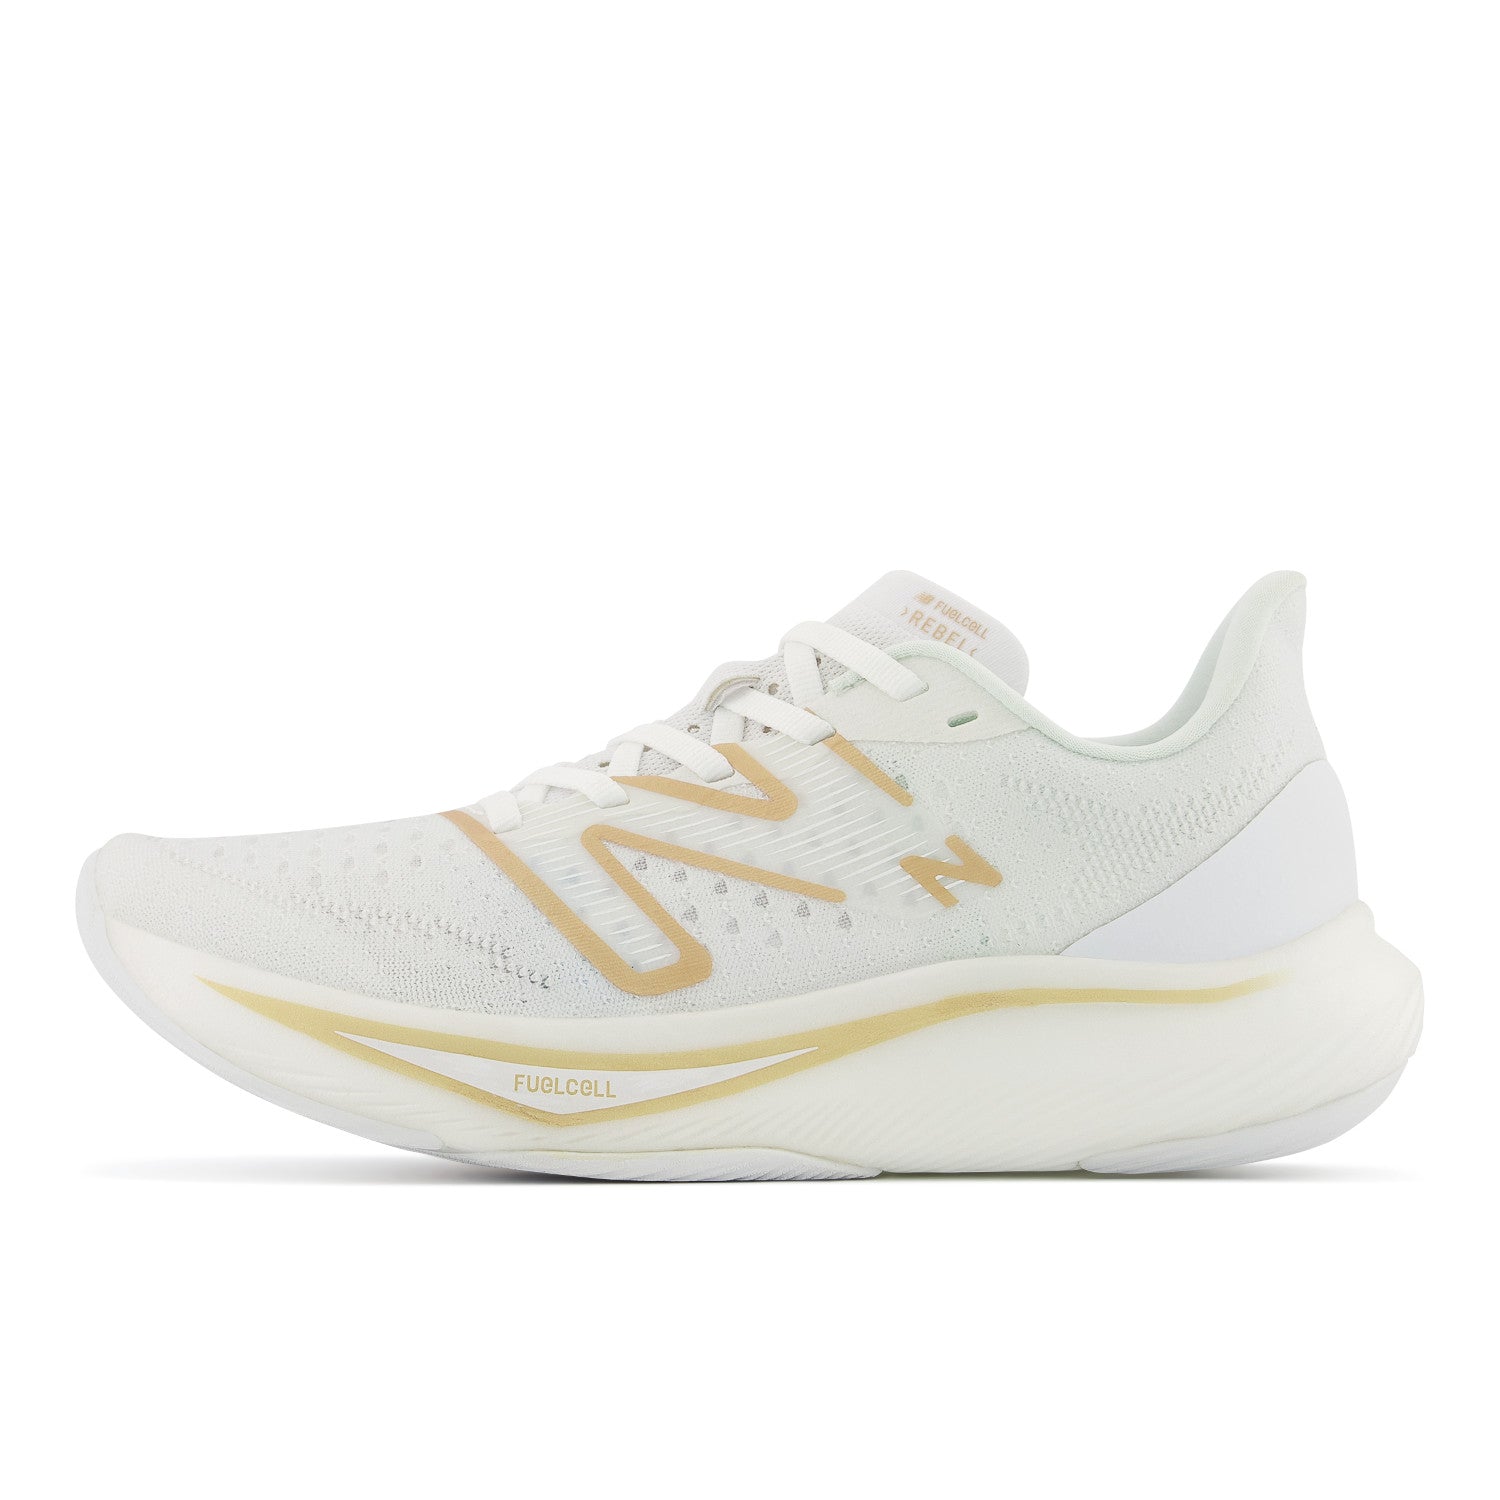 New Balance FuelCell Rebel v3 WFCXMW3 Women's7